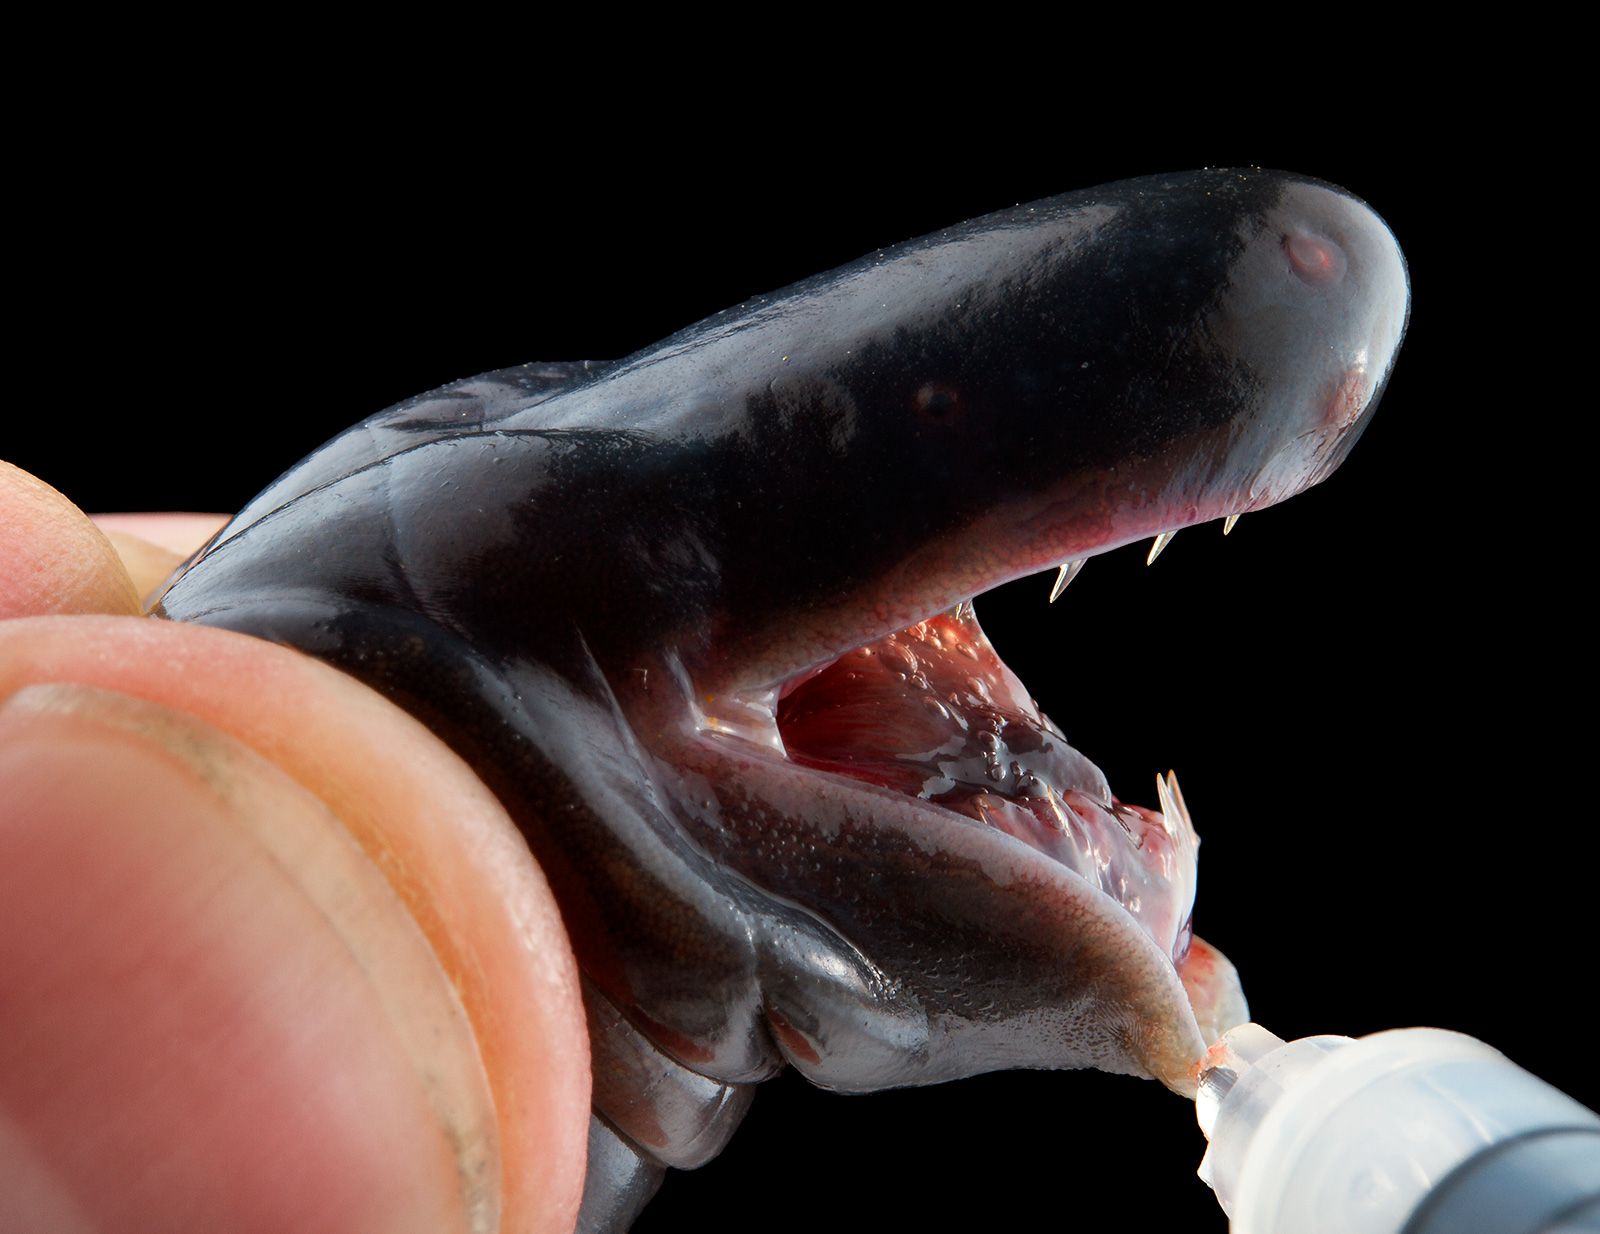 Close up shot of the mouth of Caecilia pachynema, showing its teeth